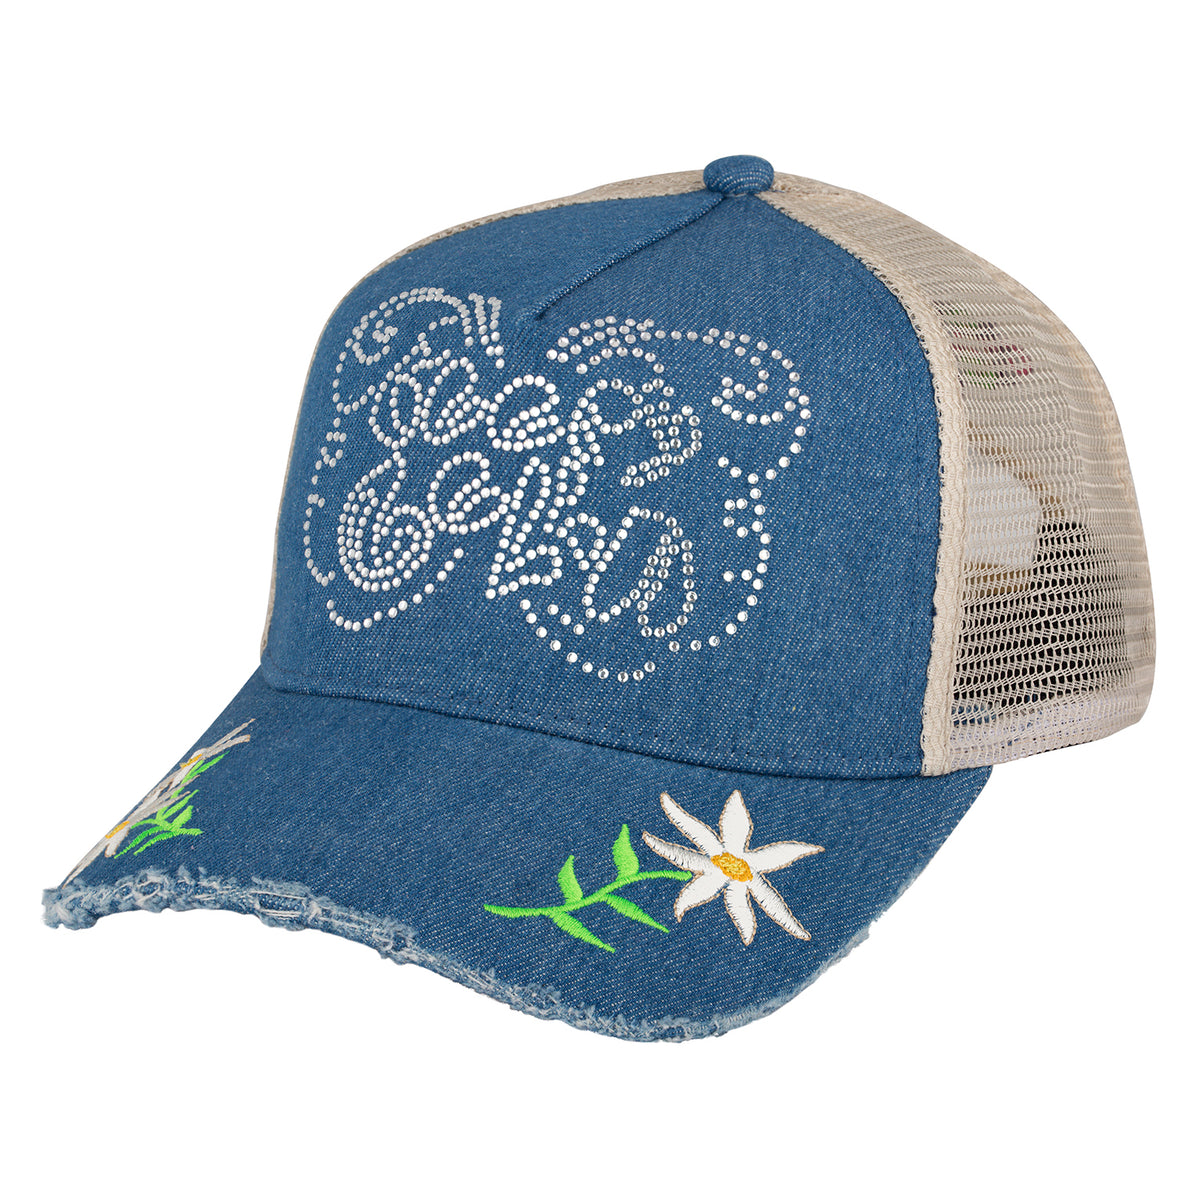 Klee Expressionism Landscape Aesthetic Baseball Caps With Yellow Birds Big  Size Hood For Men And Women Ideal For Hiking And Trucker Use From  Hellosally, $13.02